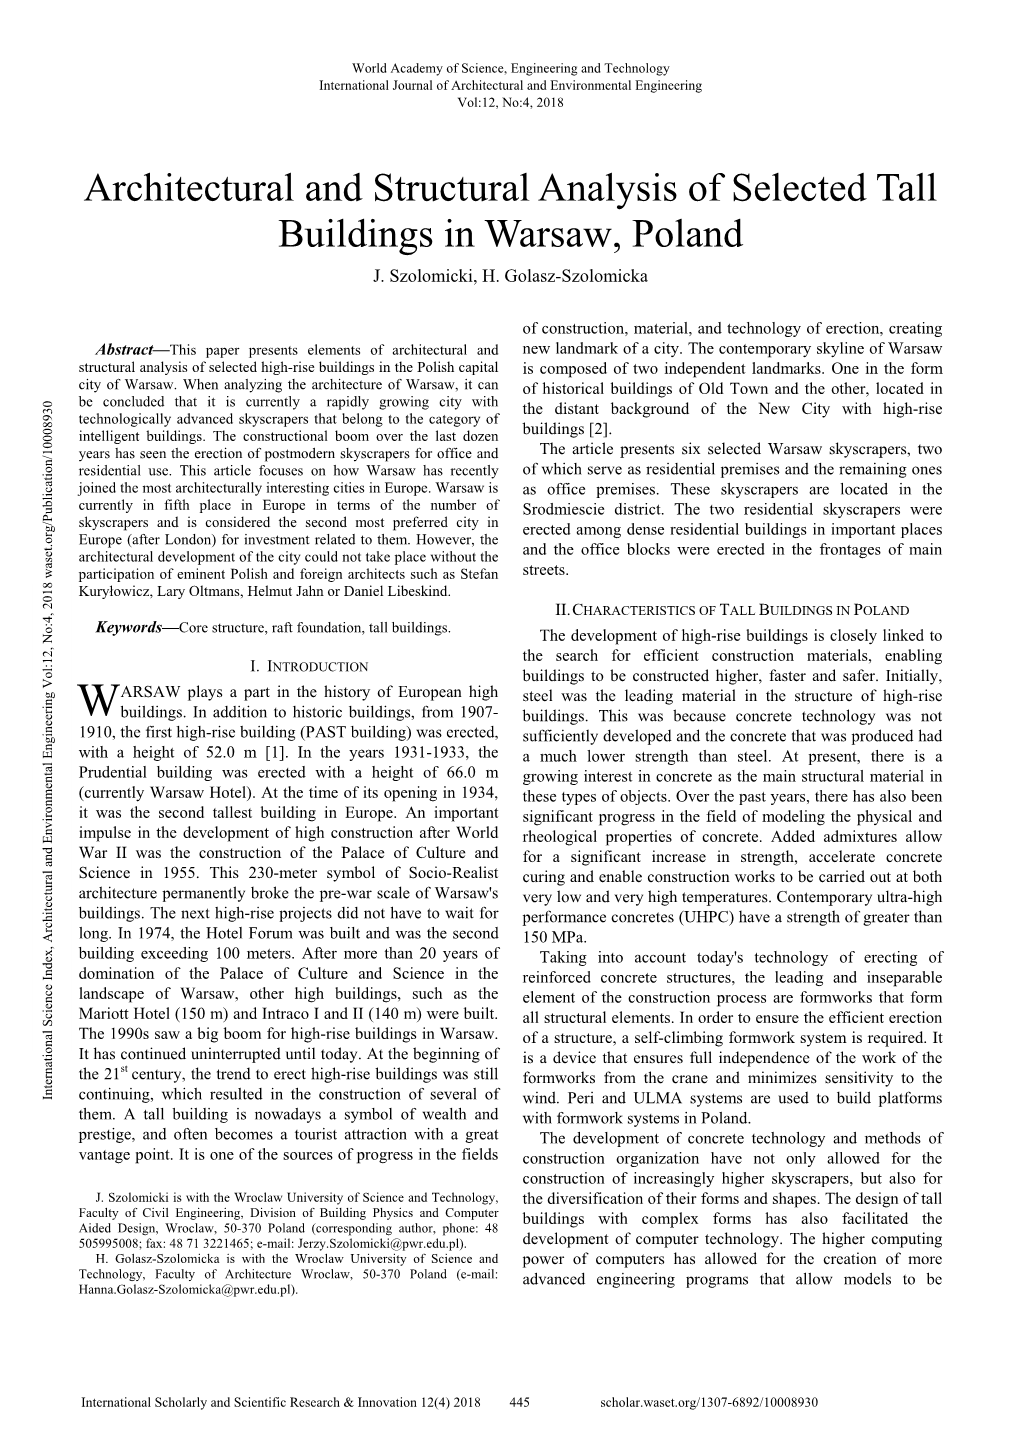 Architectural and Structural Analysis of Selected Tall Buildings in Warsaw, Poland J